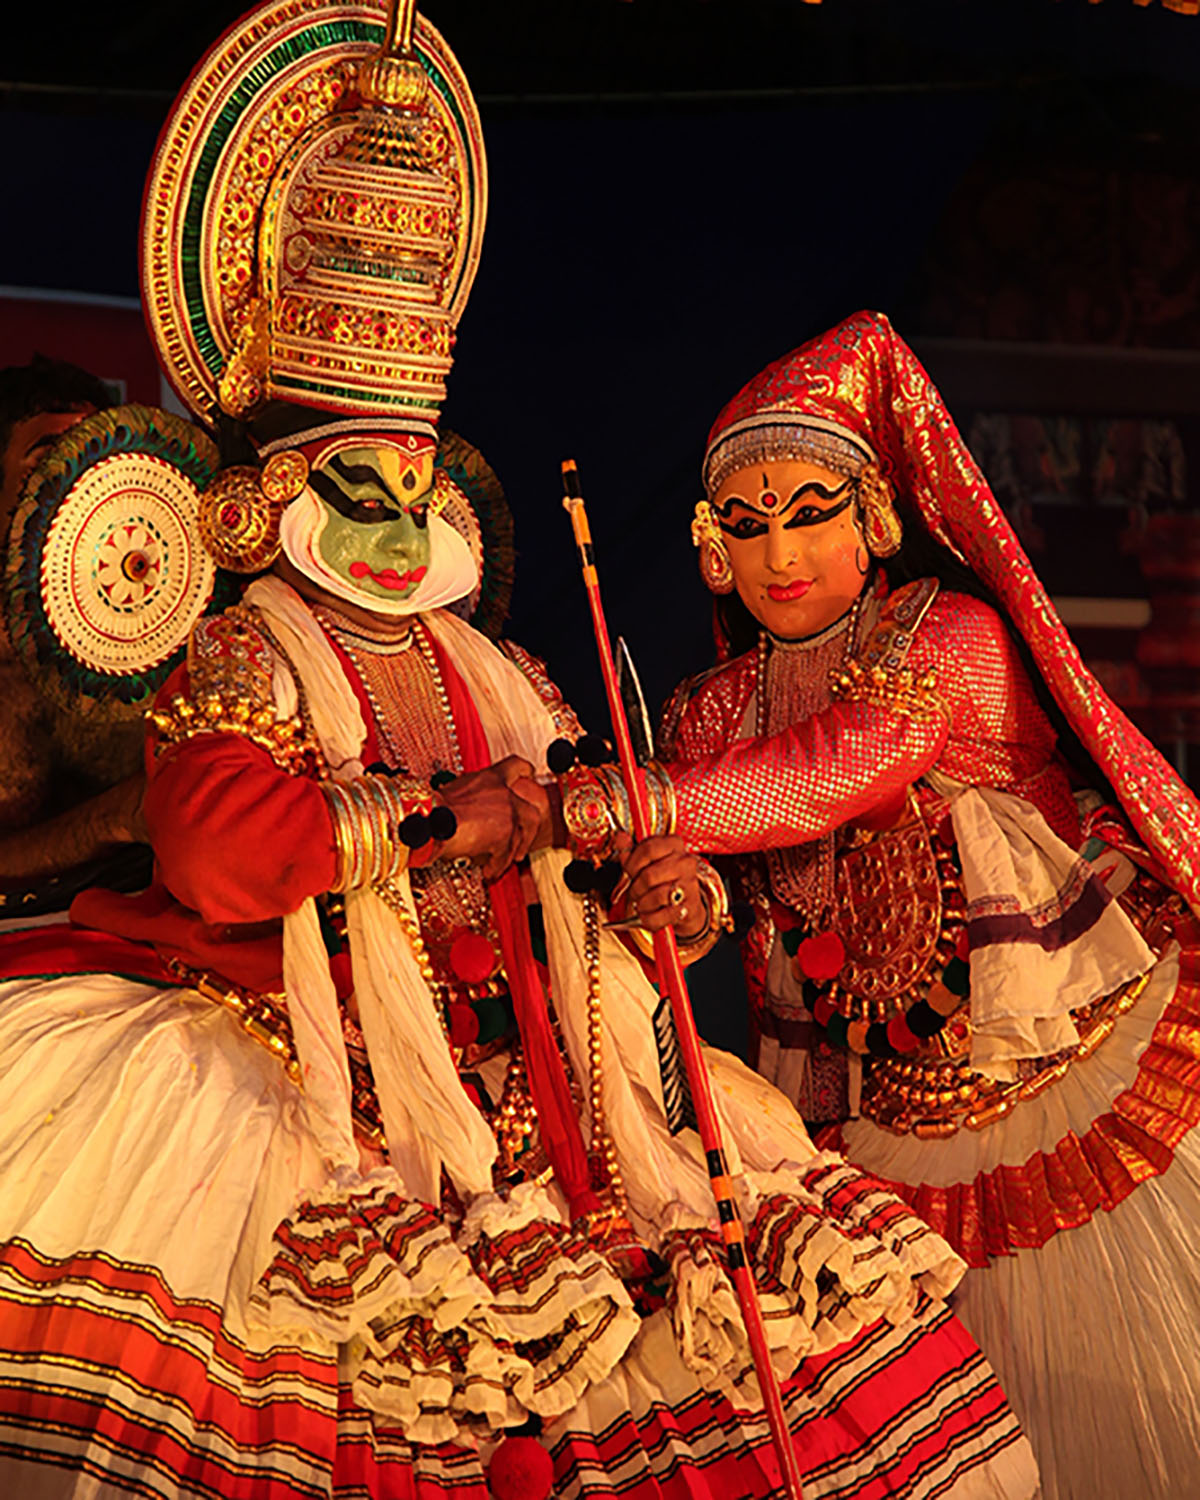 A pair of Kathakali dancers wearing the costume of a male and a female character respectively.